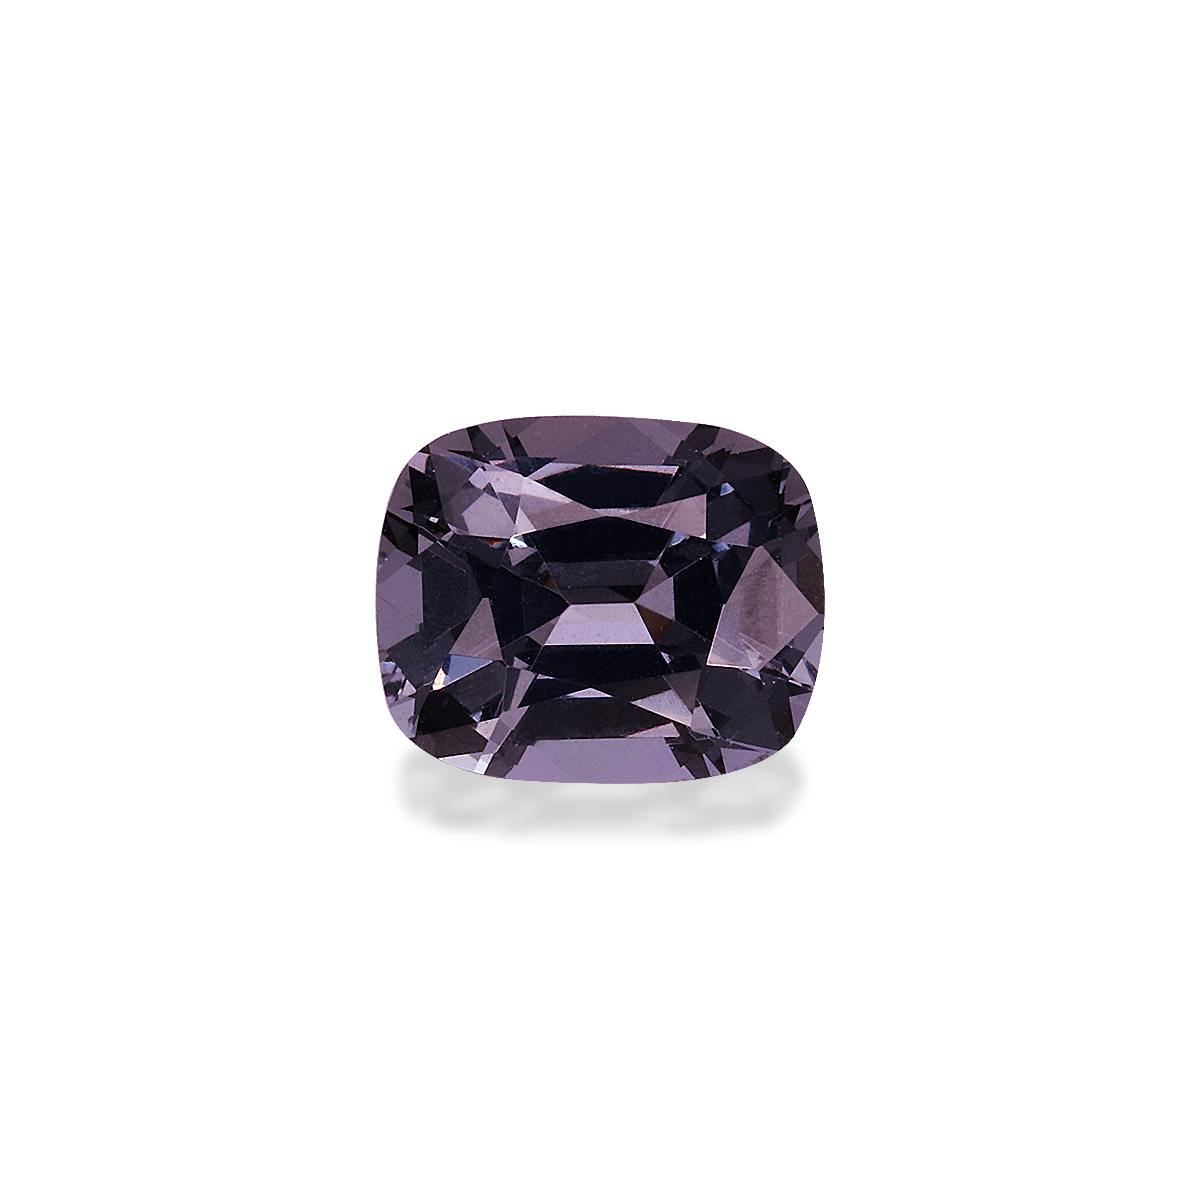 Grey Spinel 1.29ct - 7x5mm (SP0224)